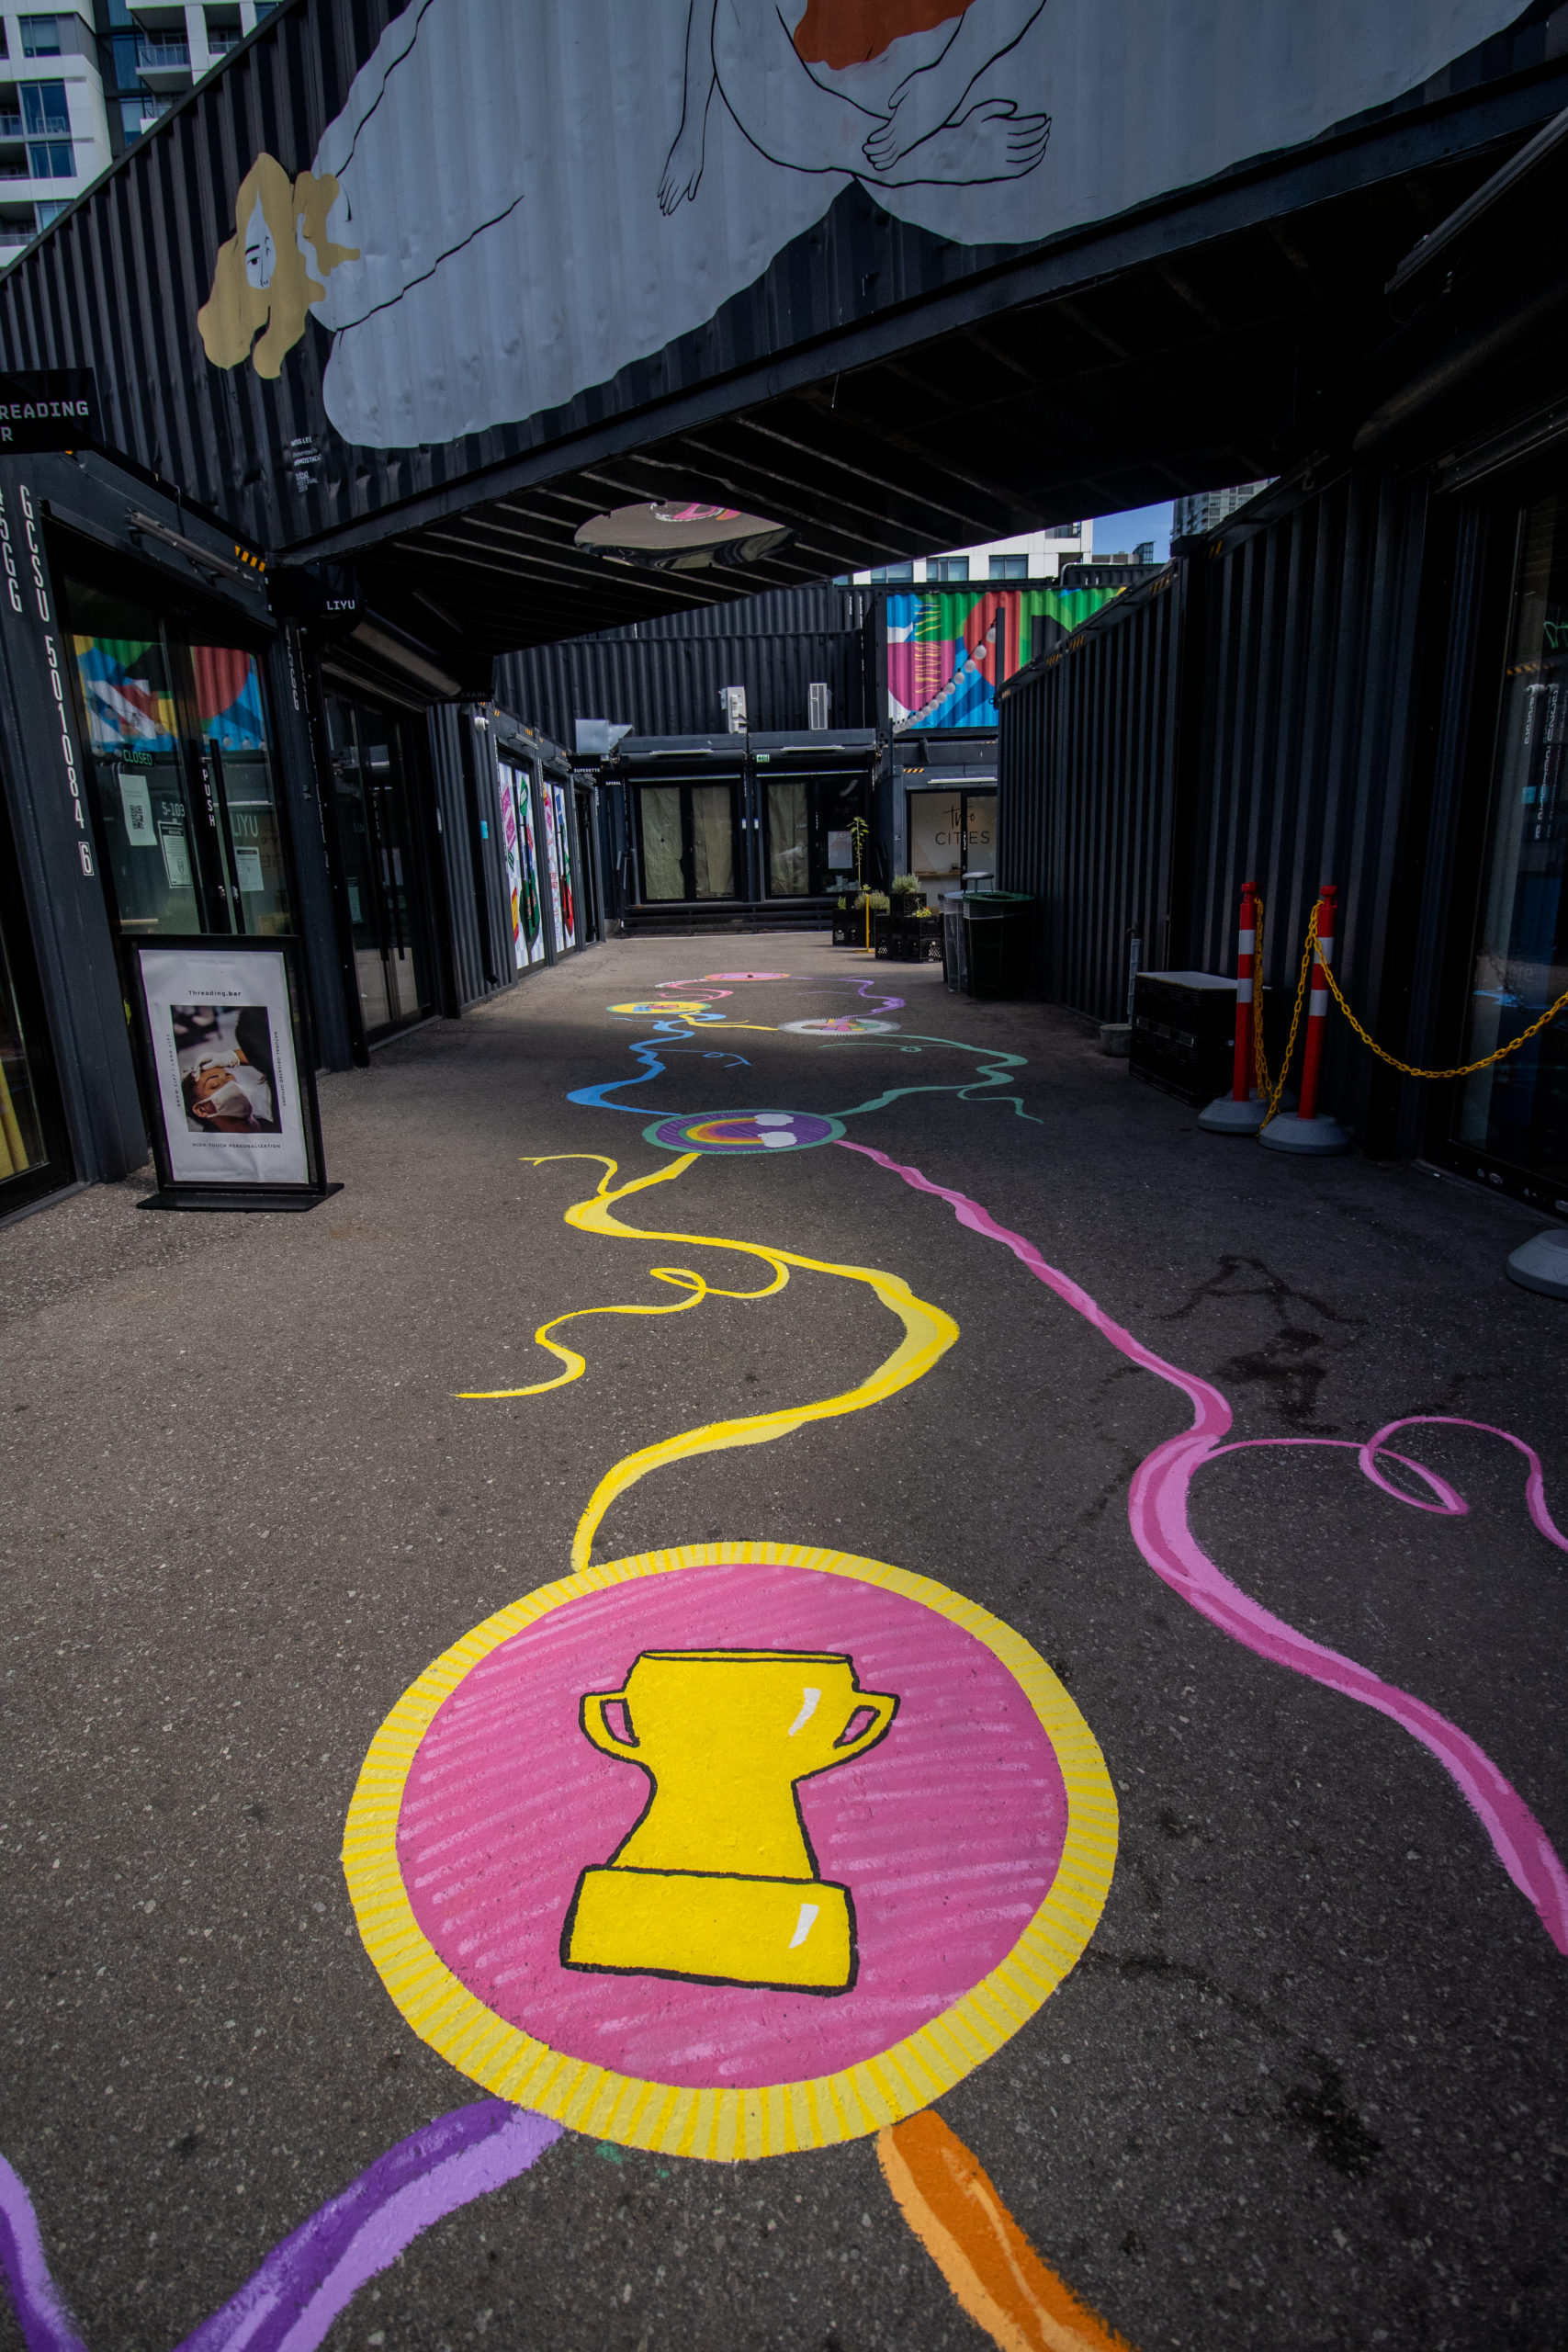 Vertical photo of a ground mural by Amanda Lederle that has "badges" with organic lines attaching them, it is colourful and bright. Located at Stackt Market in Toronto, with many converted black shippin containers, one on top with a mural by Ness Lee and condos in the back.